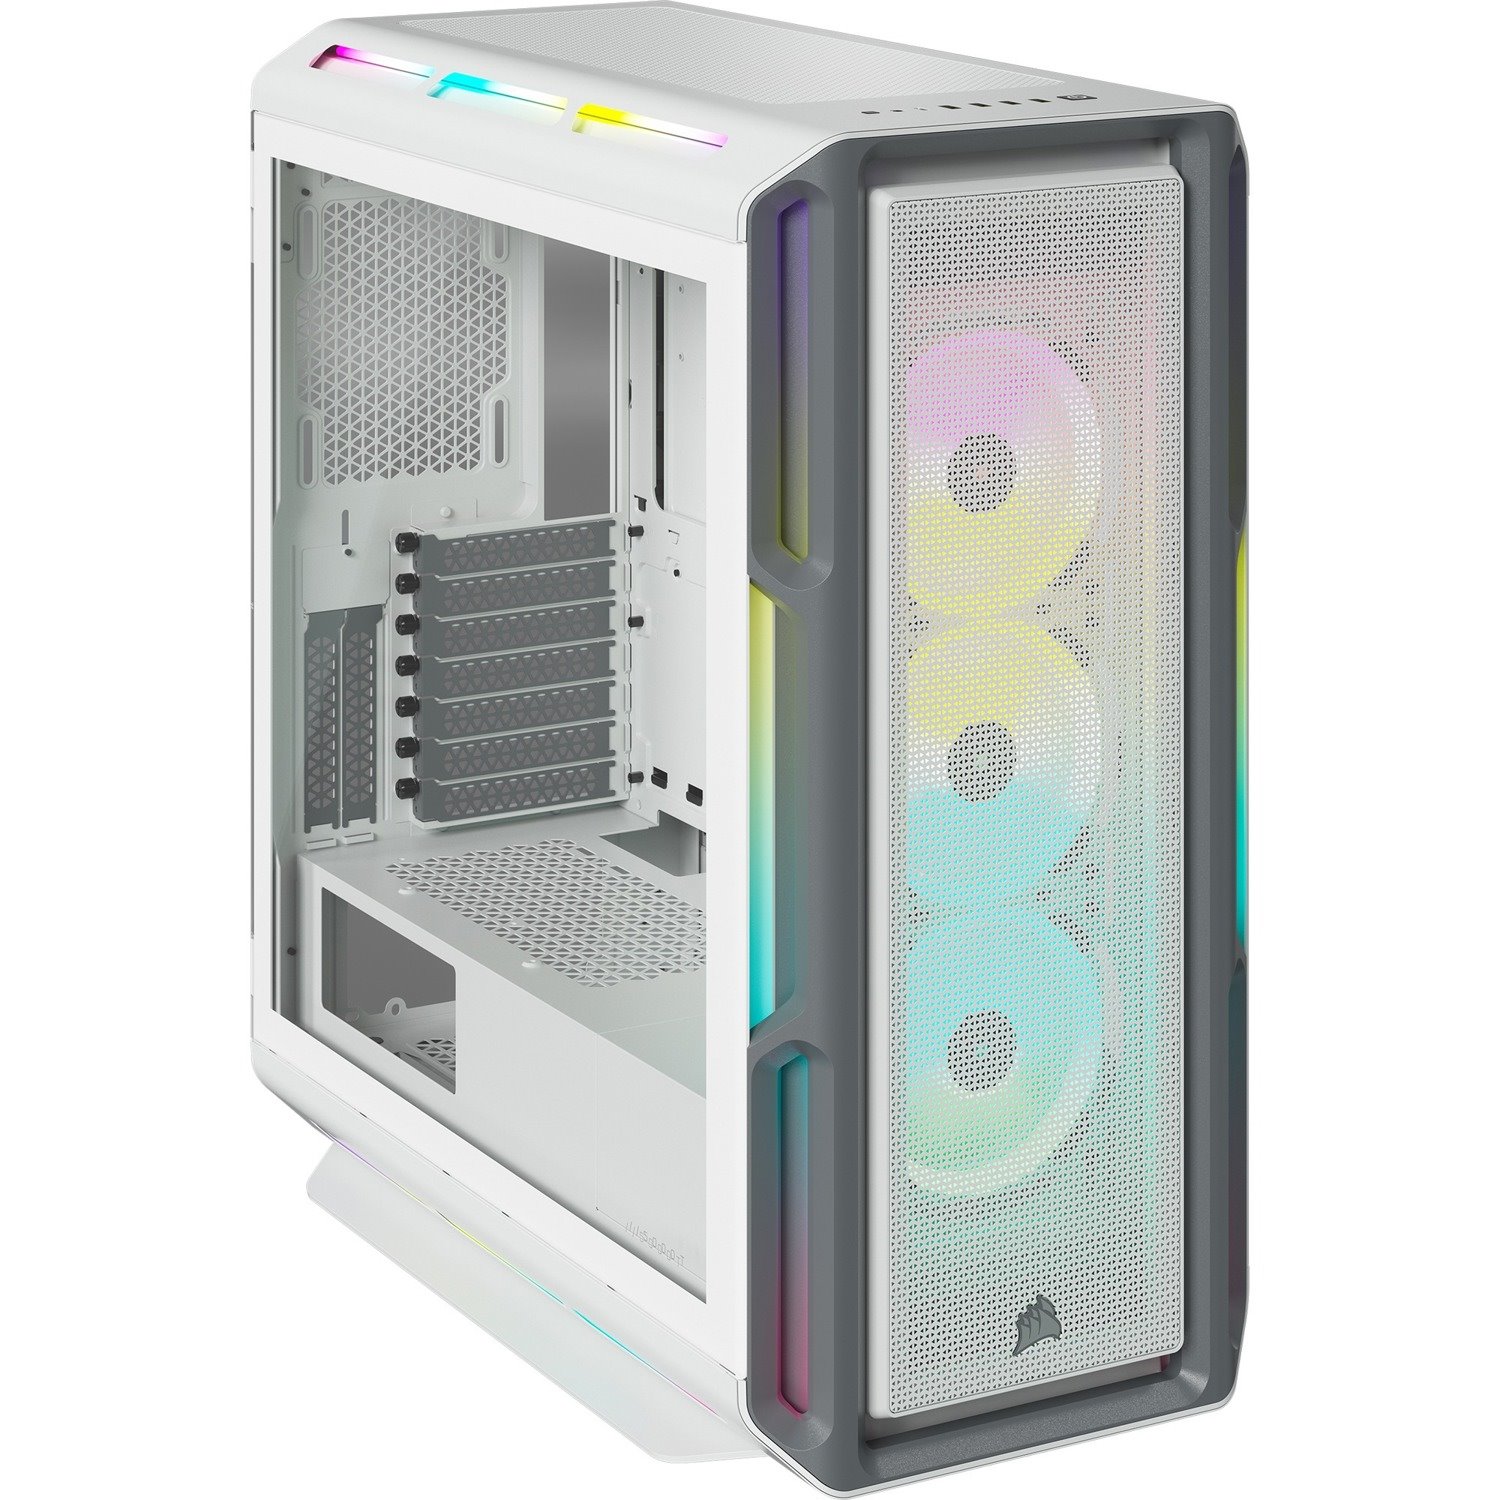 Corsair iCUE 5000T RGB Tempered Glass Mid-Tower ATX PC Case - White